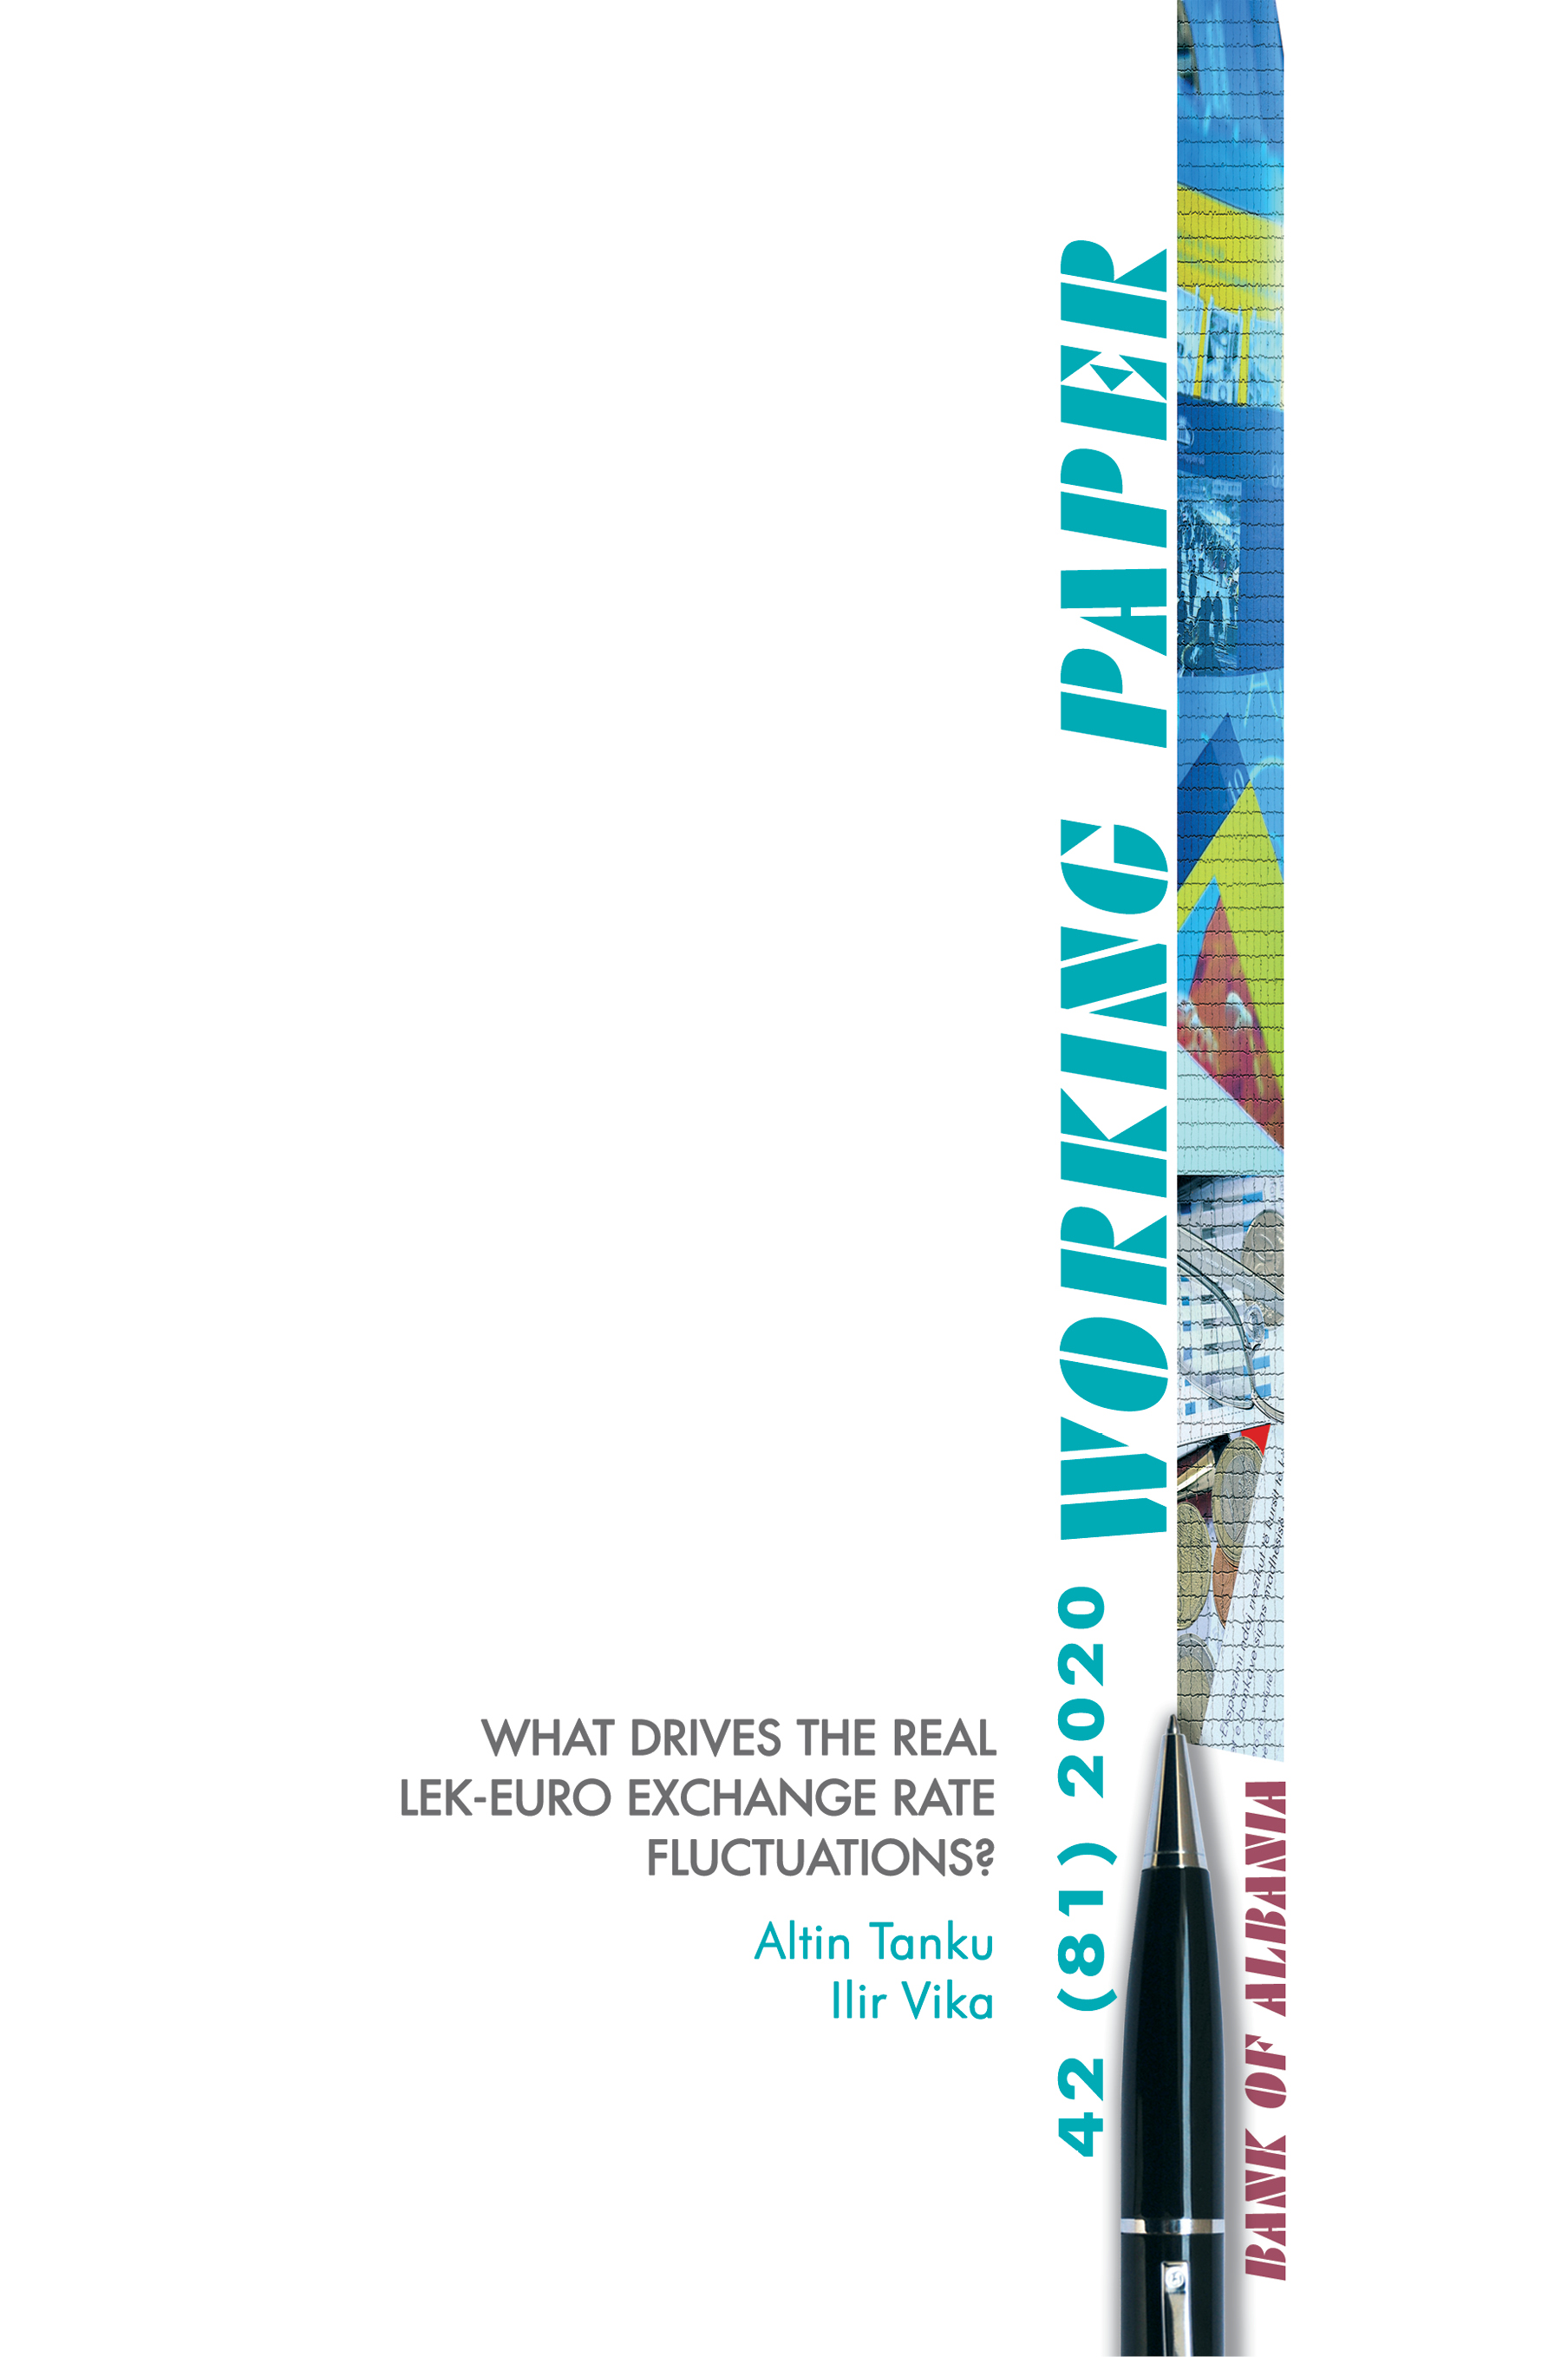 What drives the real lek-euro exchange rate fluctuations?